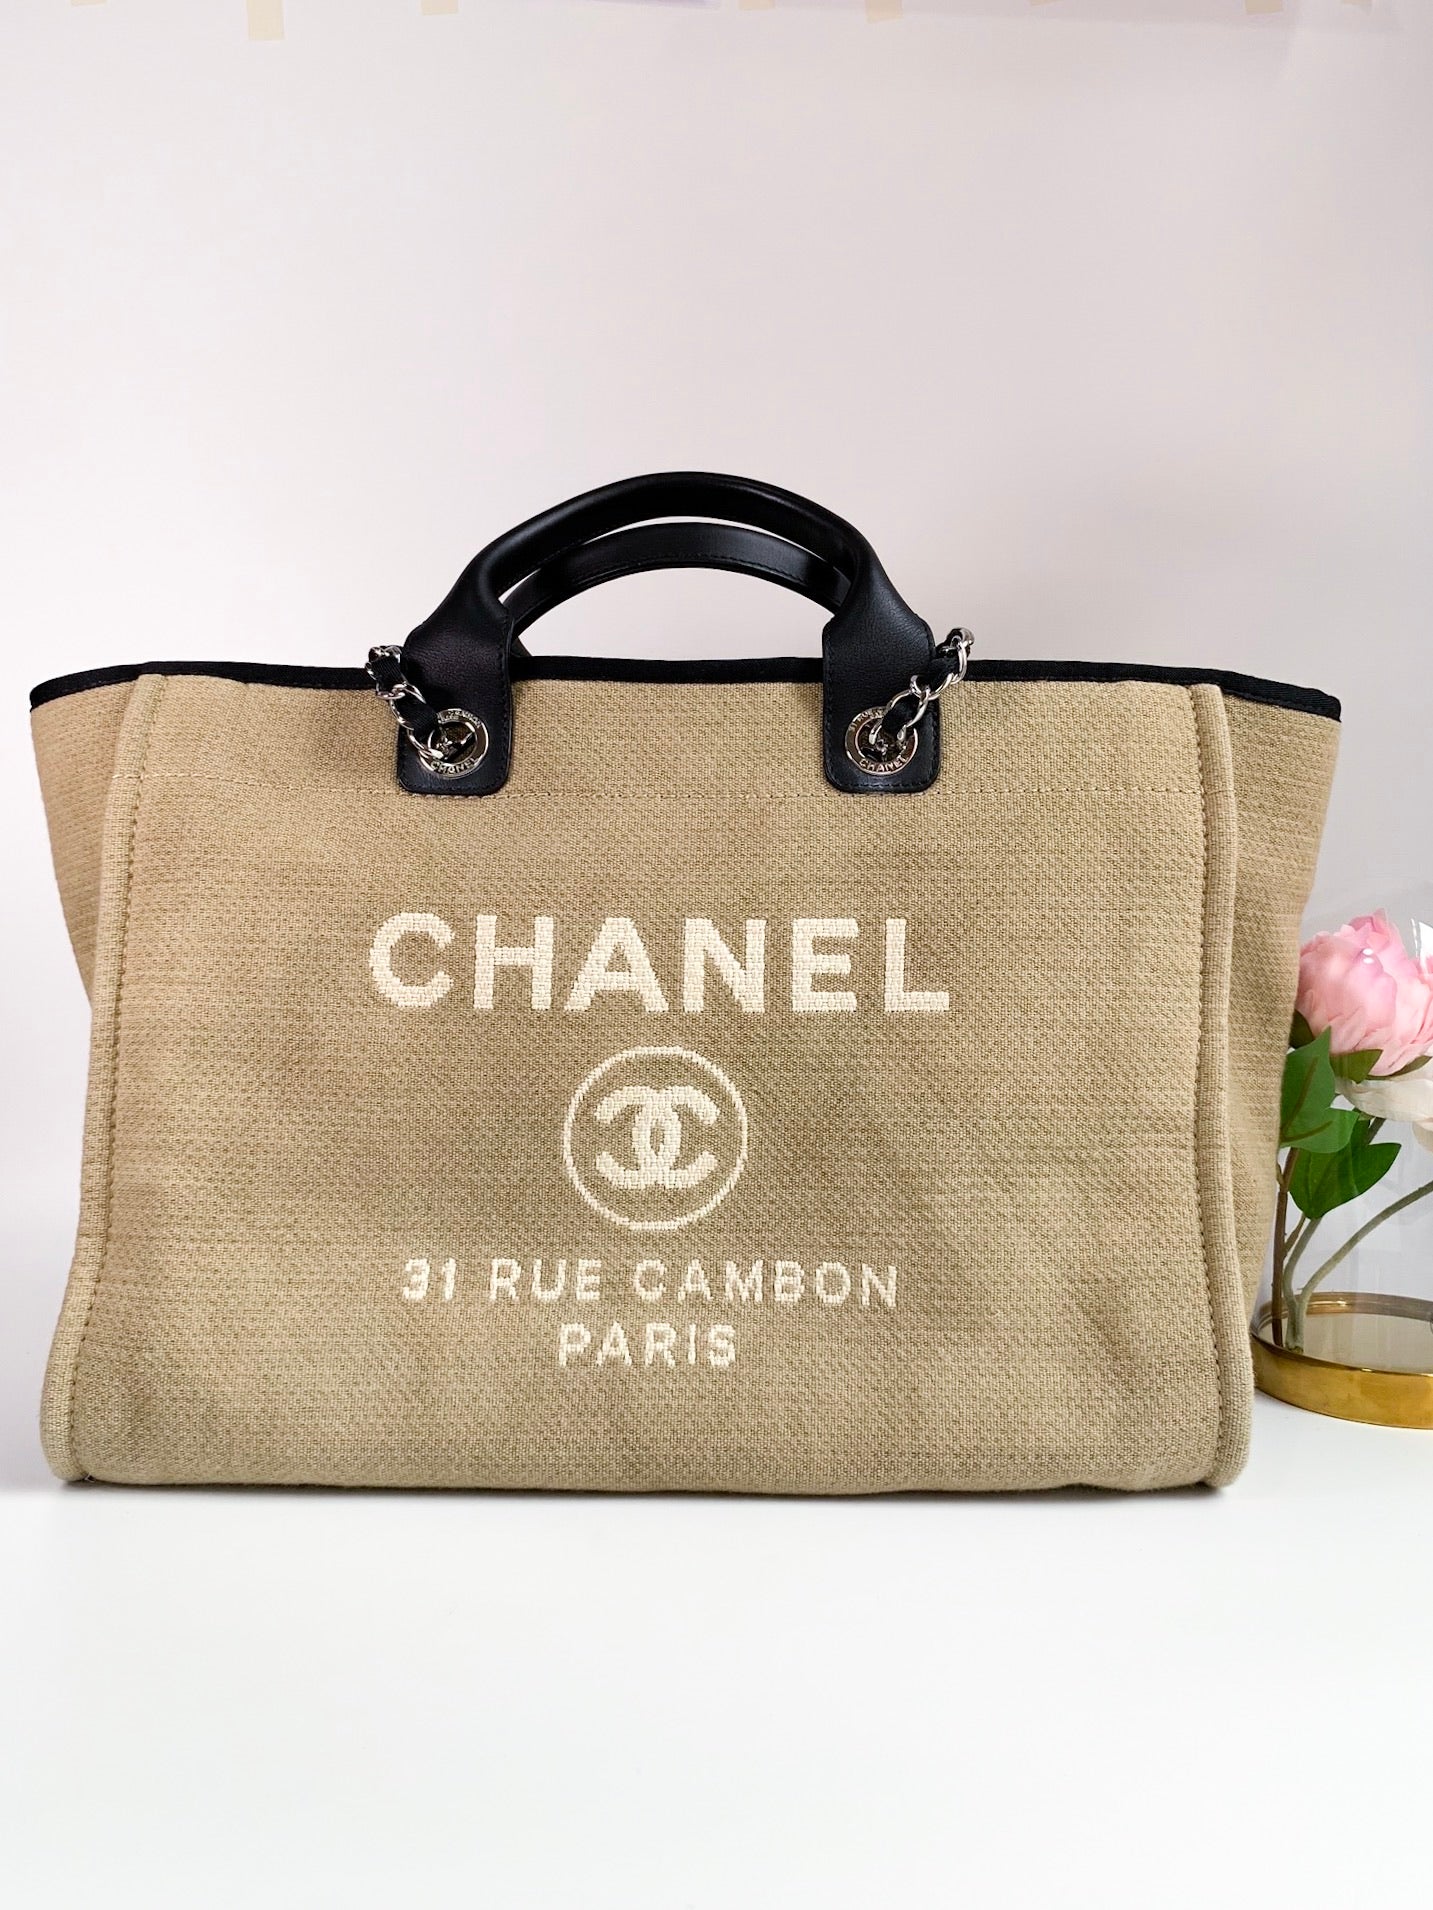 CHANEL Canvas Large Deauville Tote Light Beige 425125